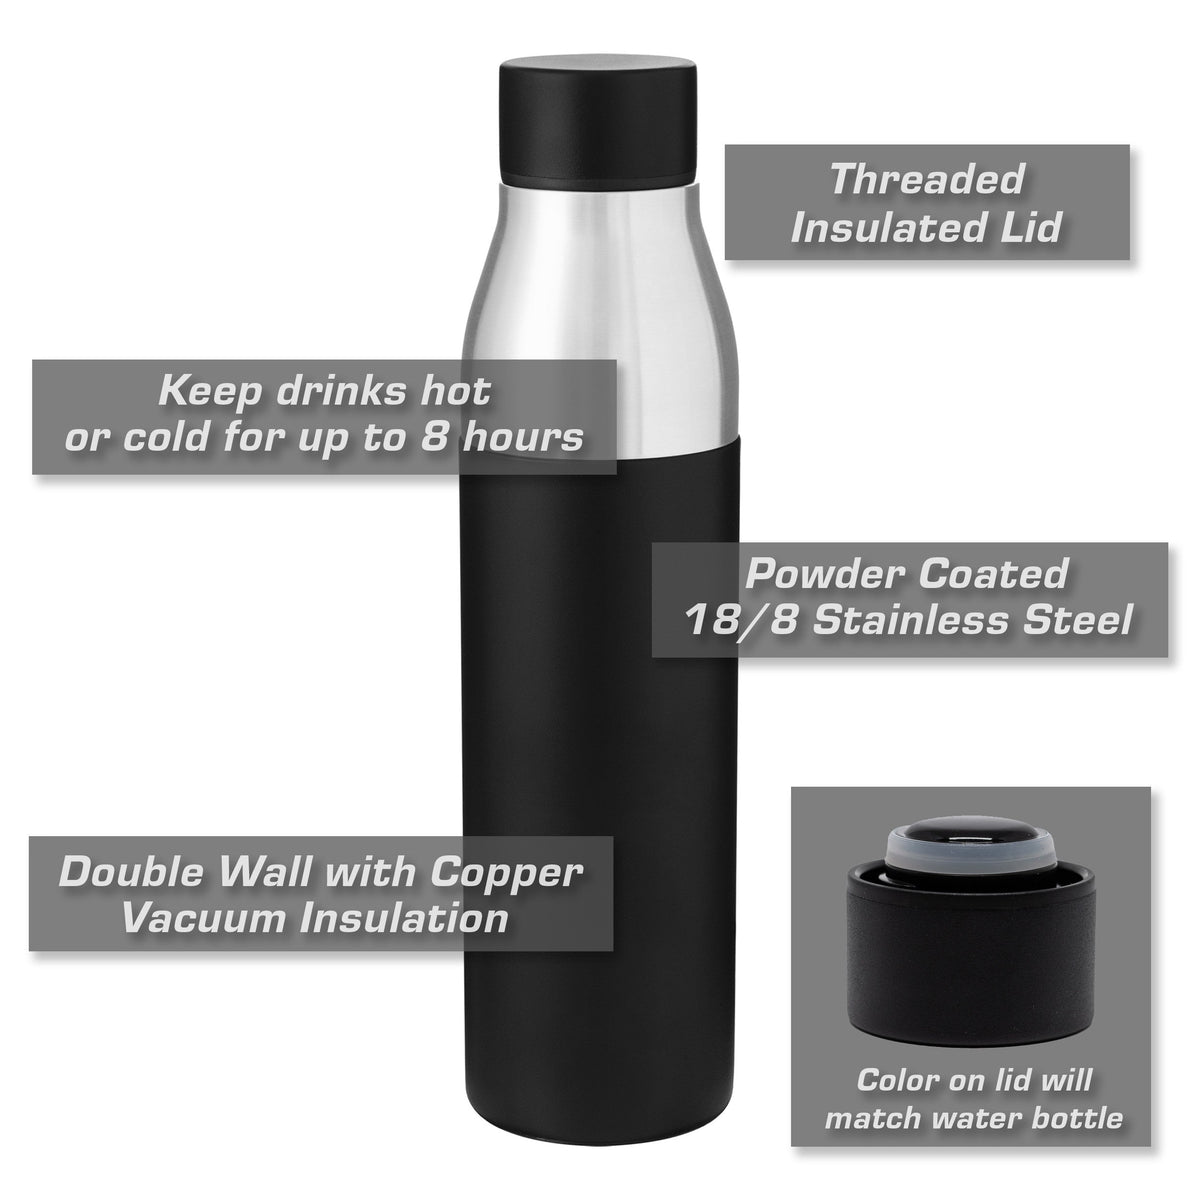 Toyota Land Cruiser FJ60 Insulated Stainless Steel Water Bottle - 21 oz